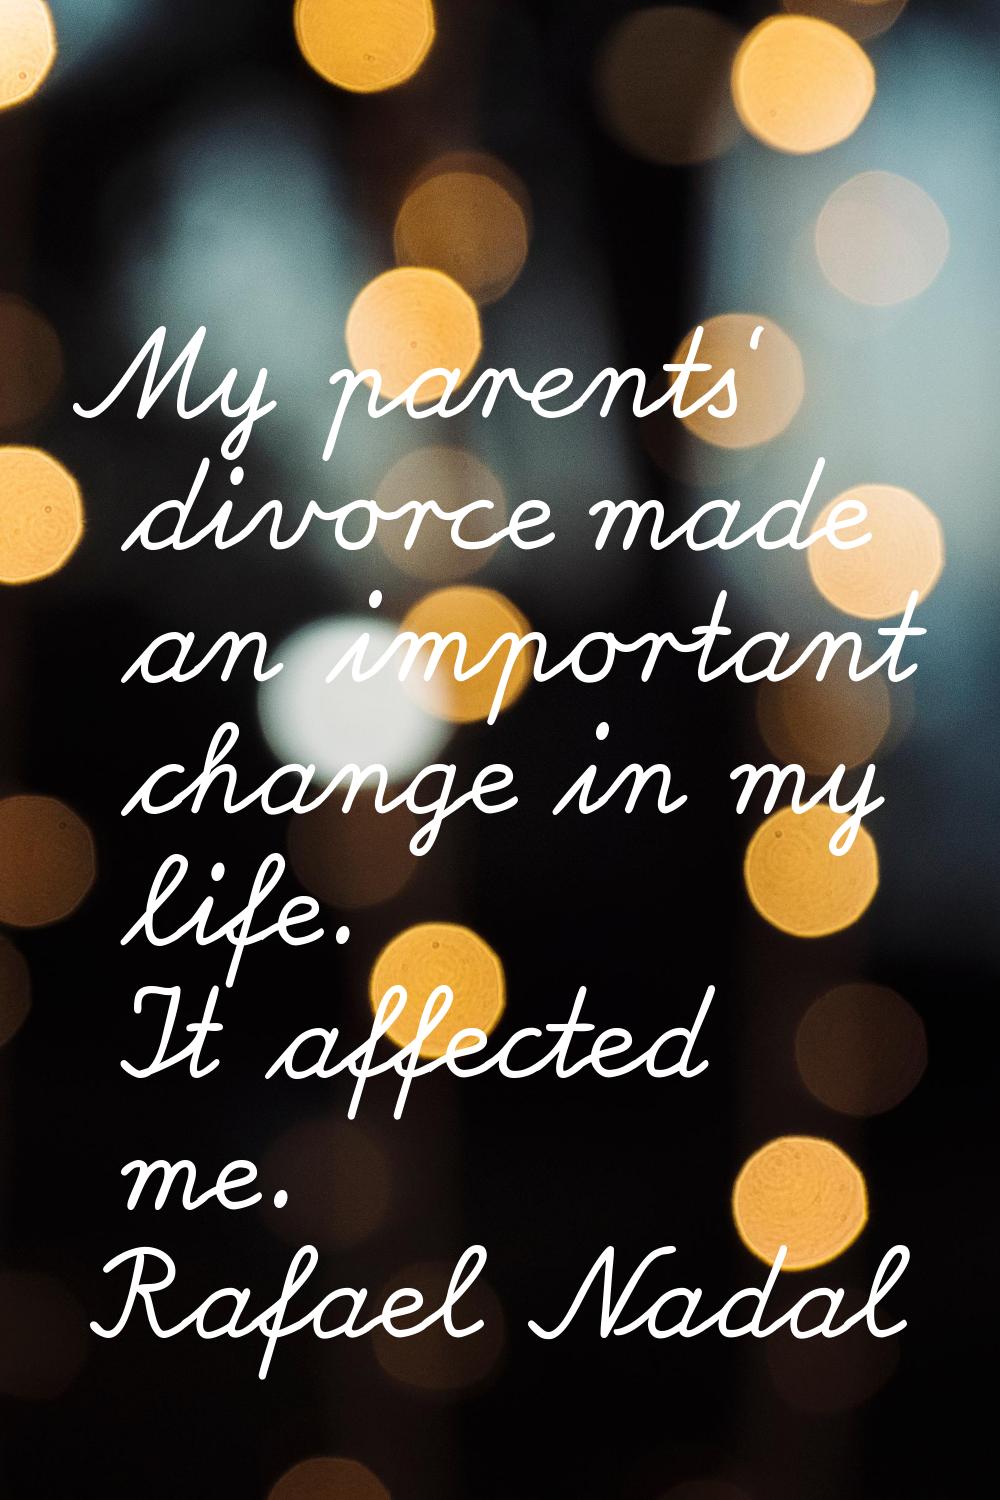 My parents' divorce made an important change in my life. It affected me.